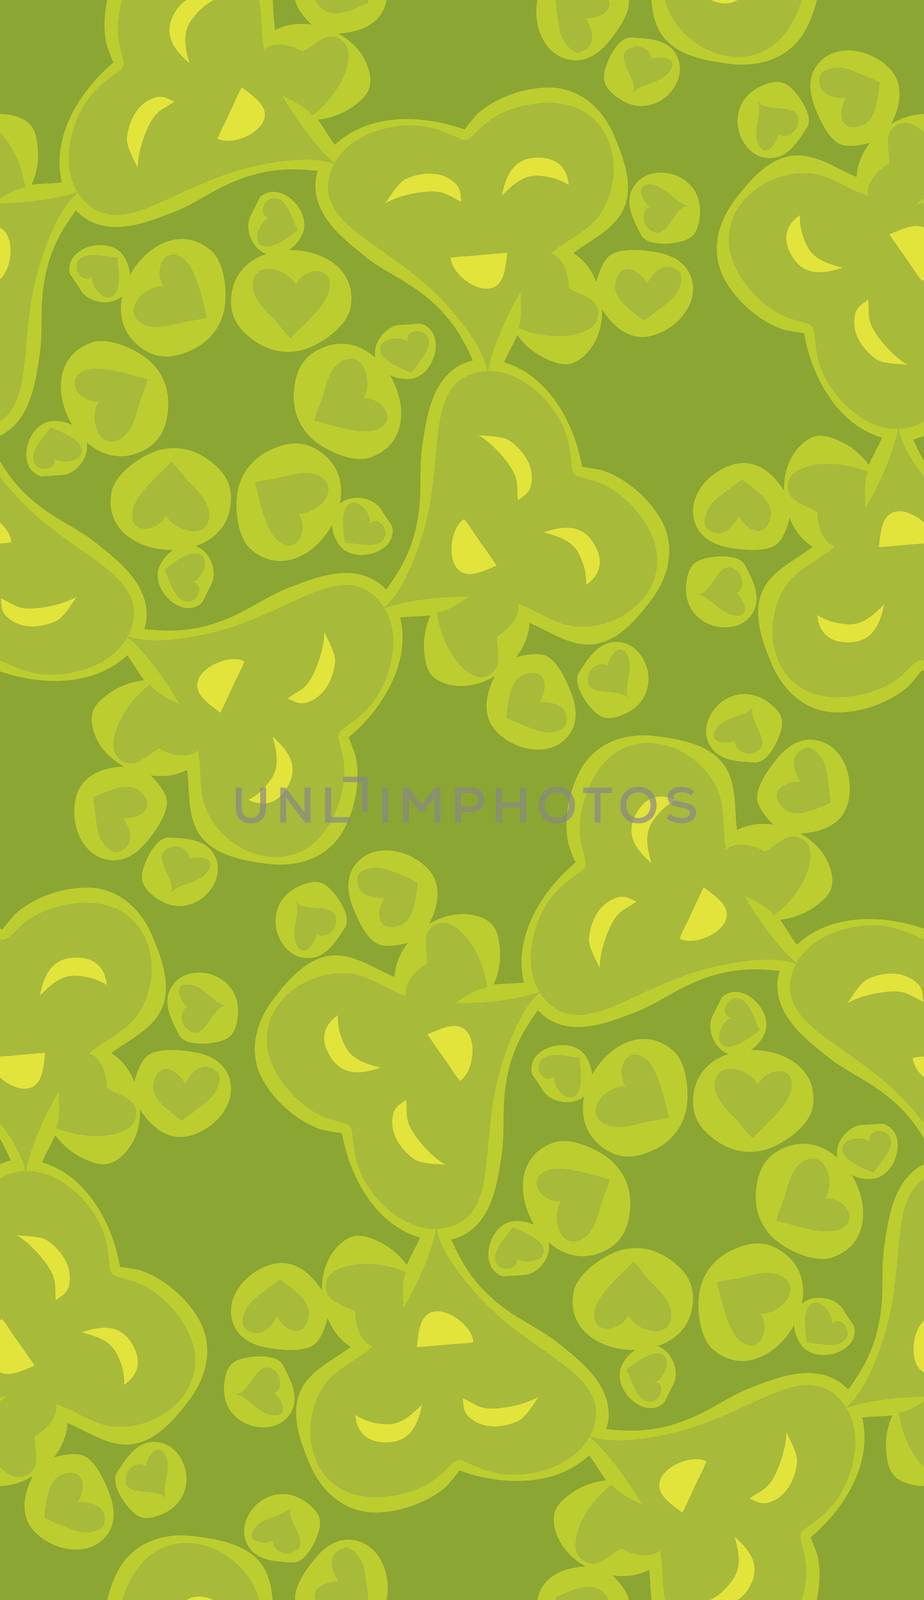 Repeating background pattern of green smiling heart shapes